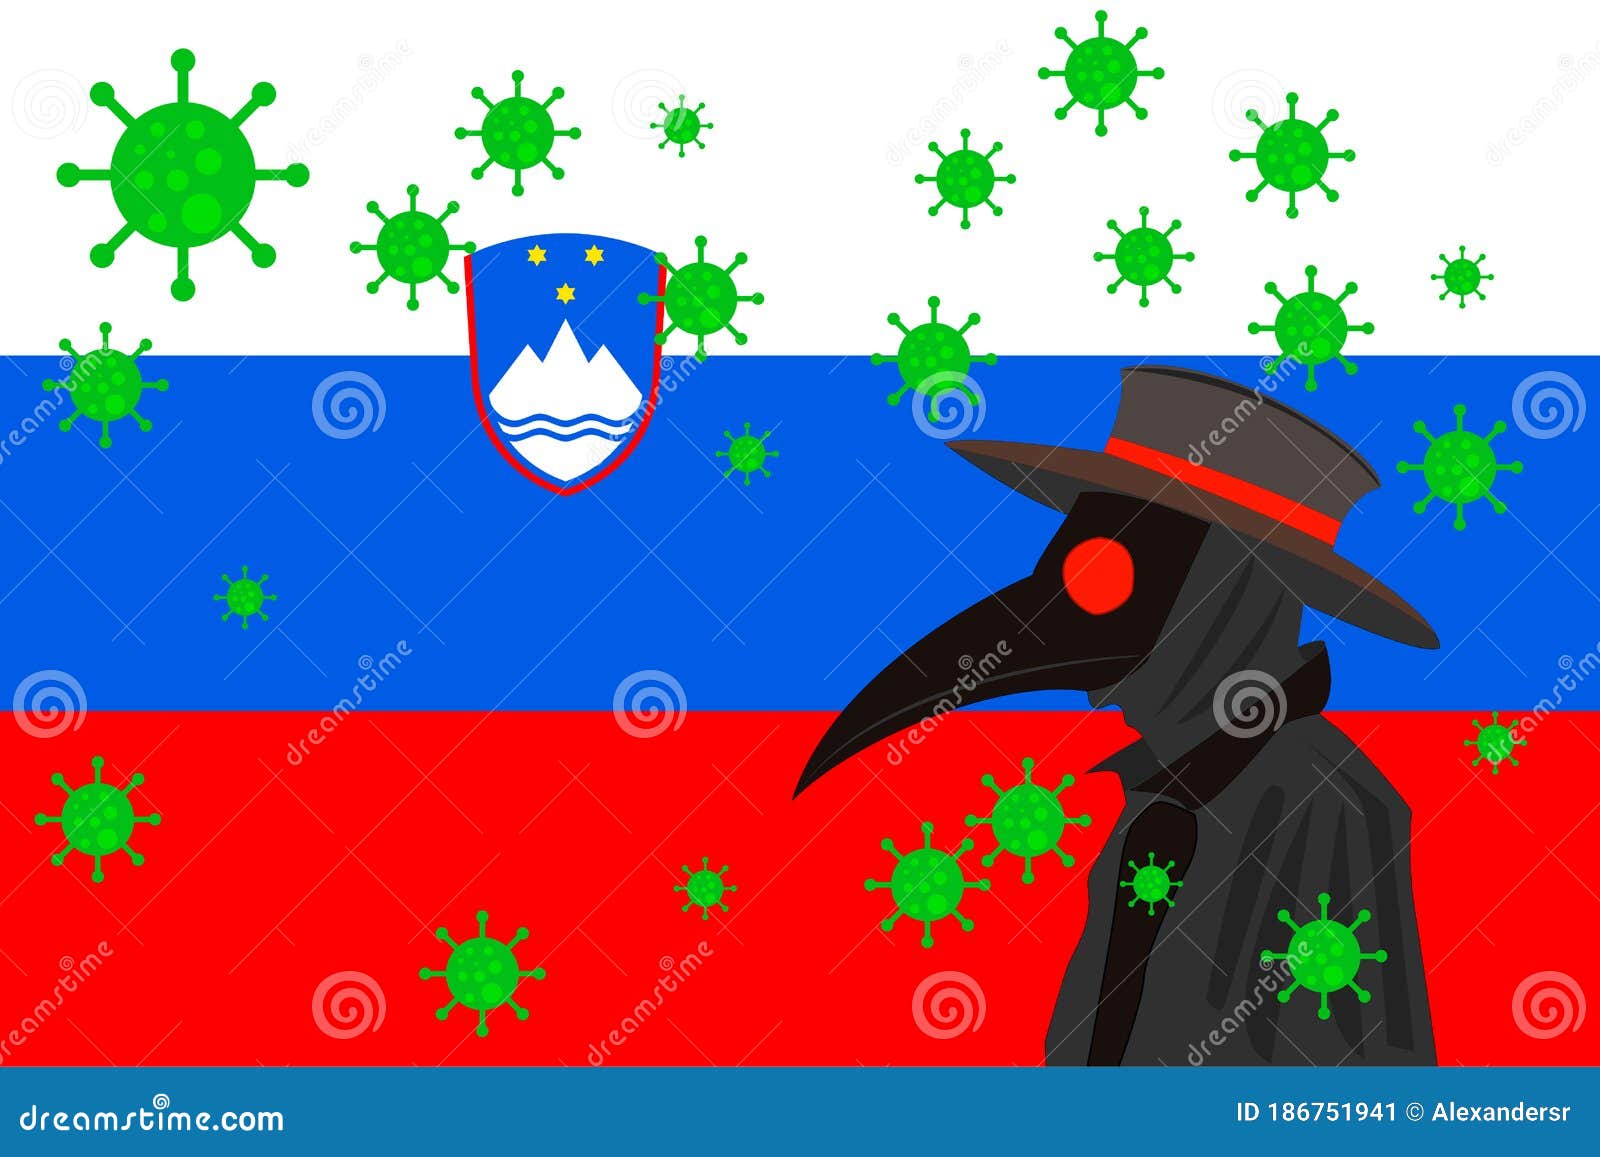 black plague doctor surrounded by viruses with copy space with eslovenia flag